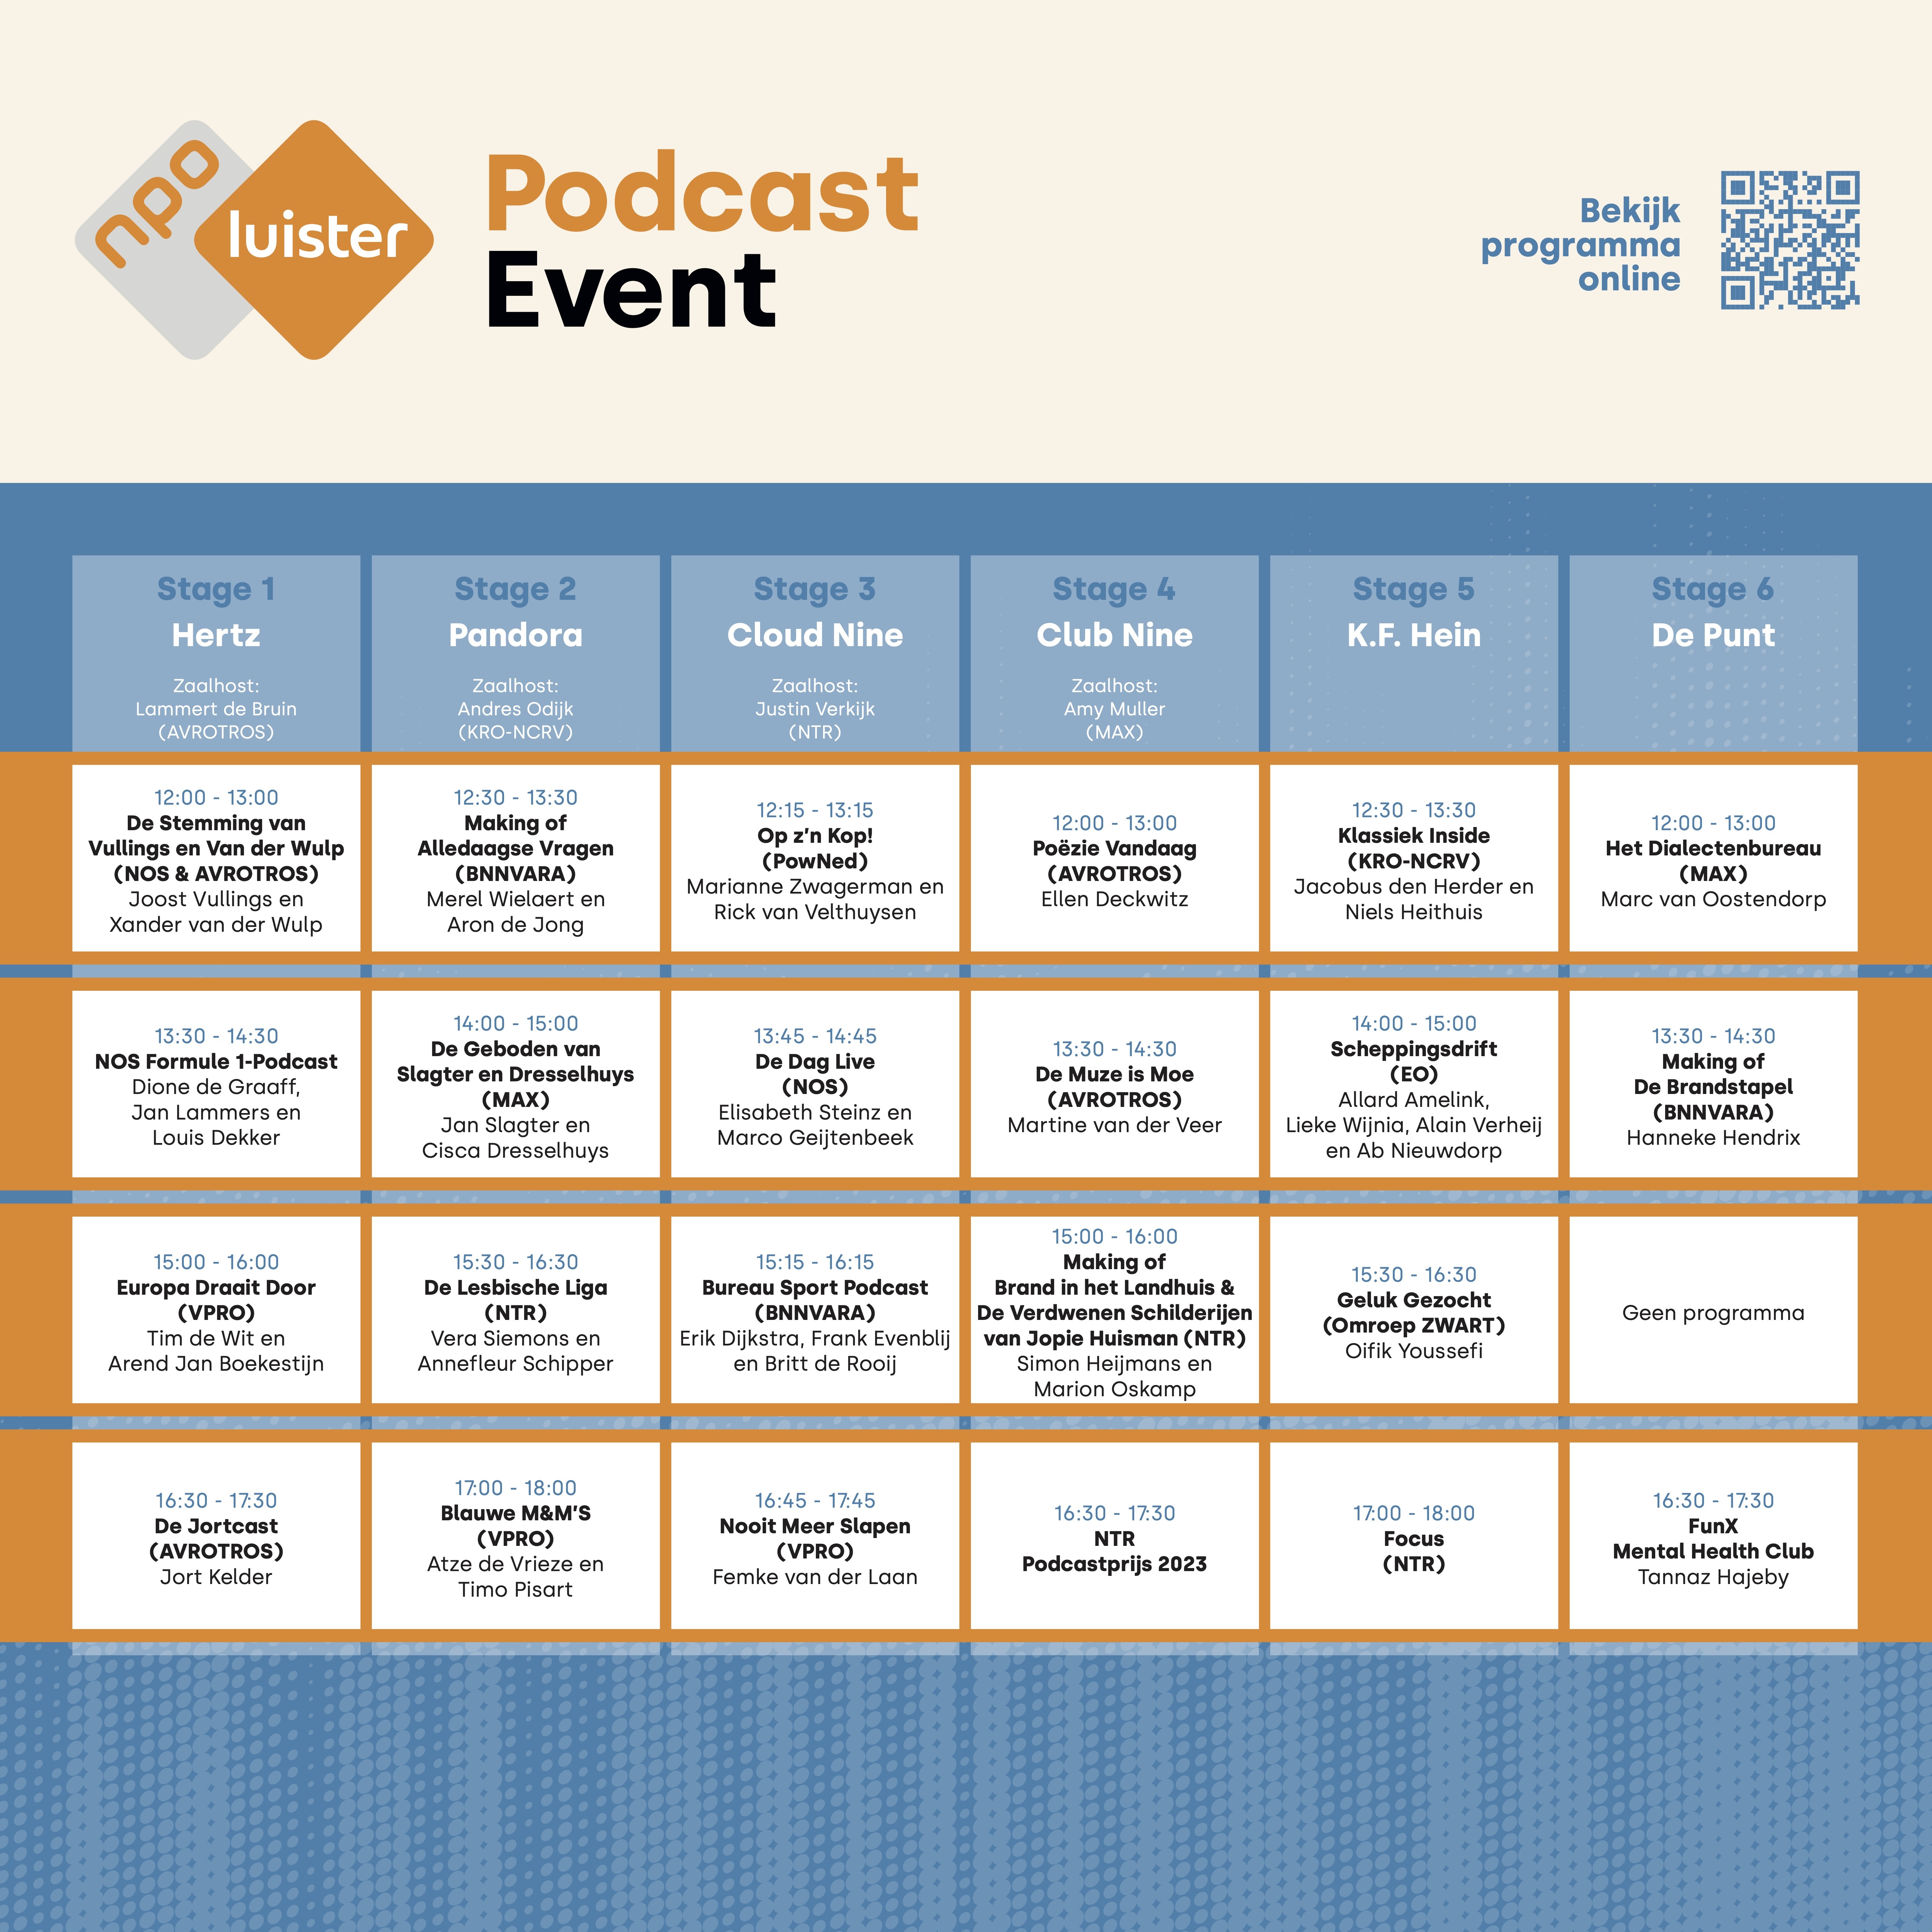 0123011 NPO Podcast Event rollup Timetable 200x200 TM LR